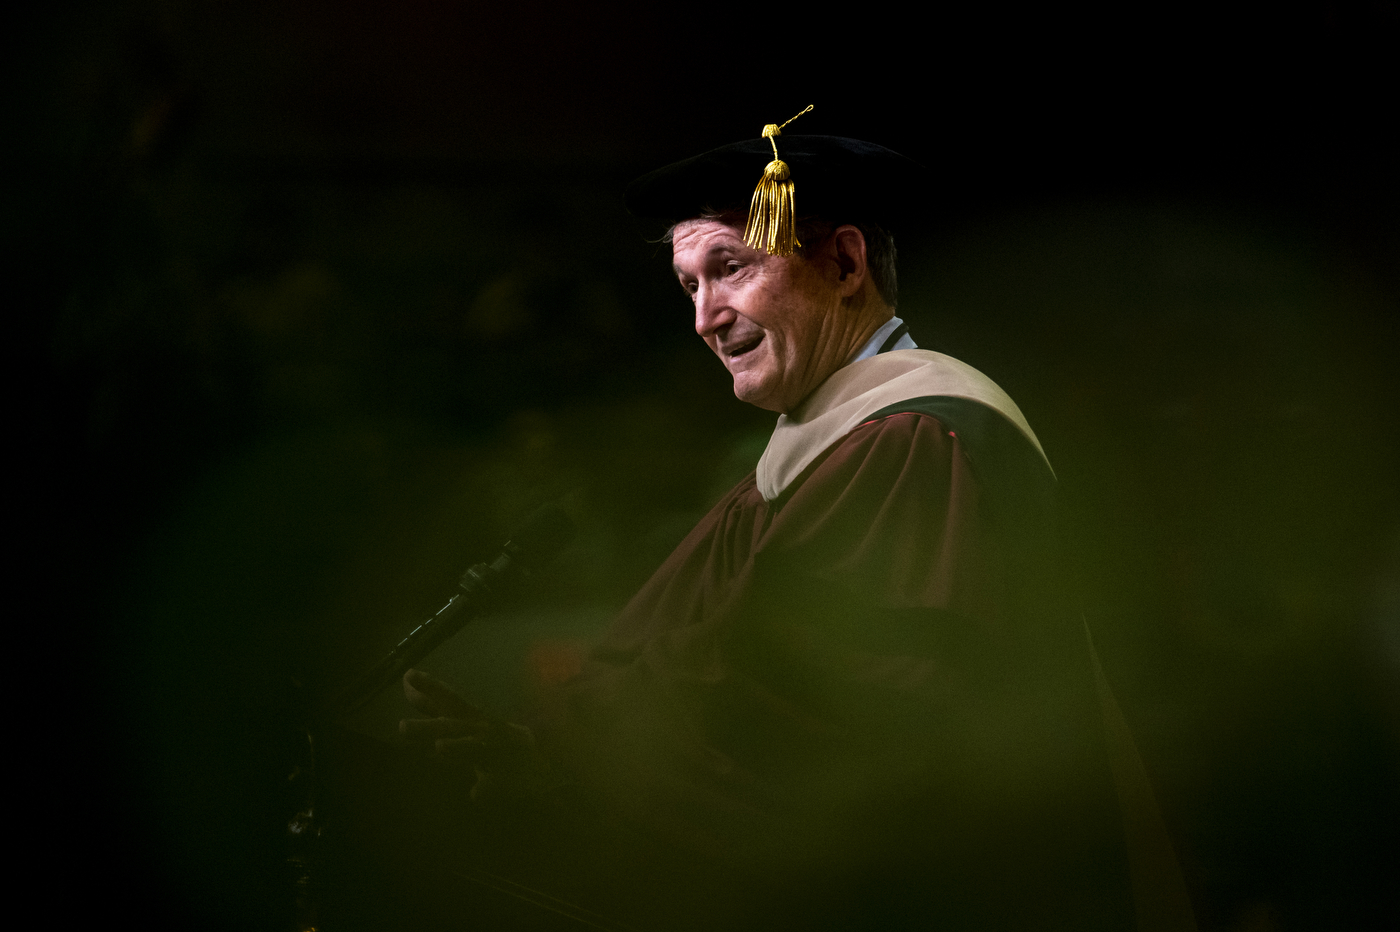 Go the extra mile to help family, friends, and colleagues, Bob Davis, a venture capitalist who co-founded one of the internet’s first search engines, told graduates of Northeastern’s D’Amore-McKim School of Business on Wednesday. “You will be amazed at how your career will fly as people take notice,” he said. Photo by Ruby Wallau/Northeastern University